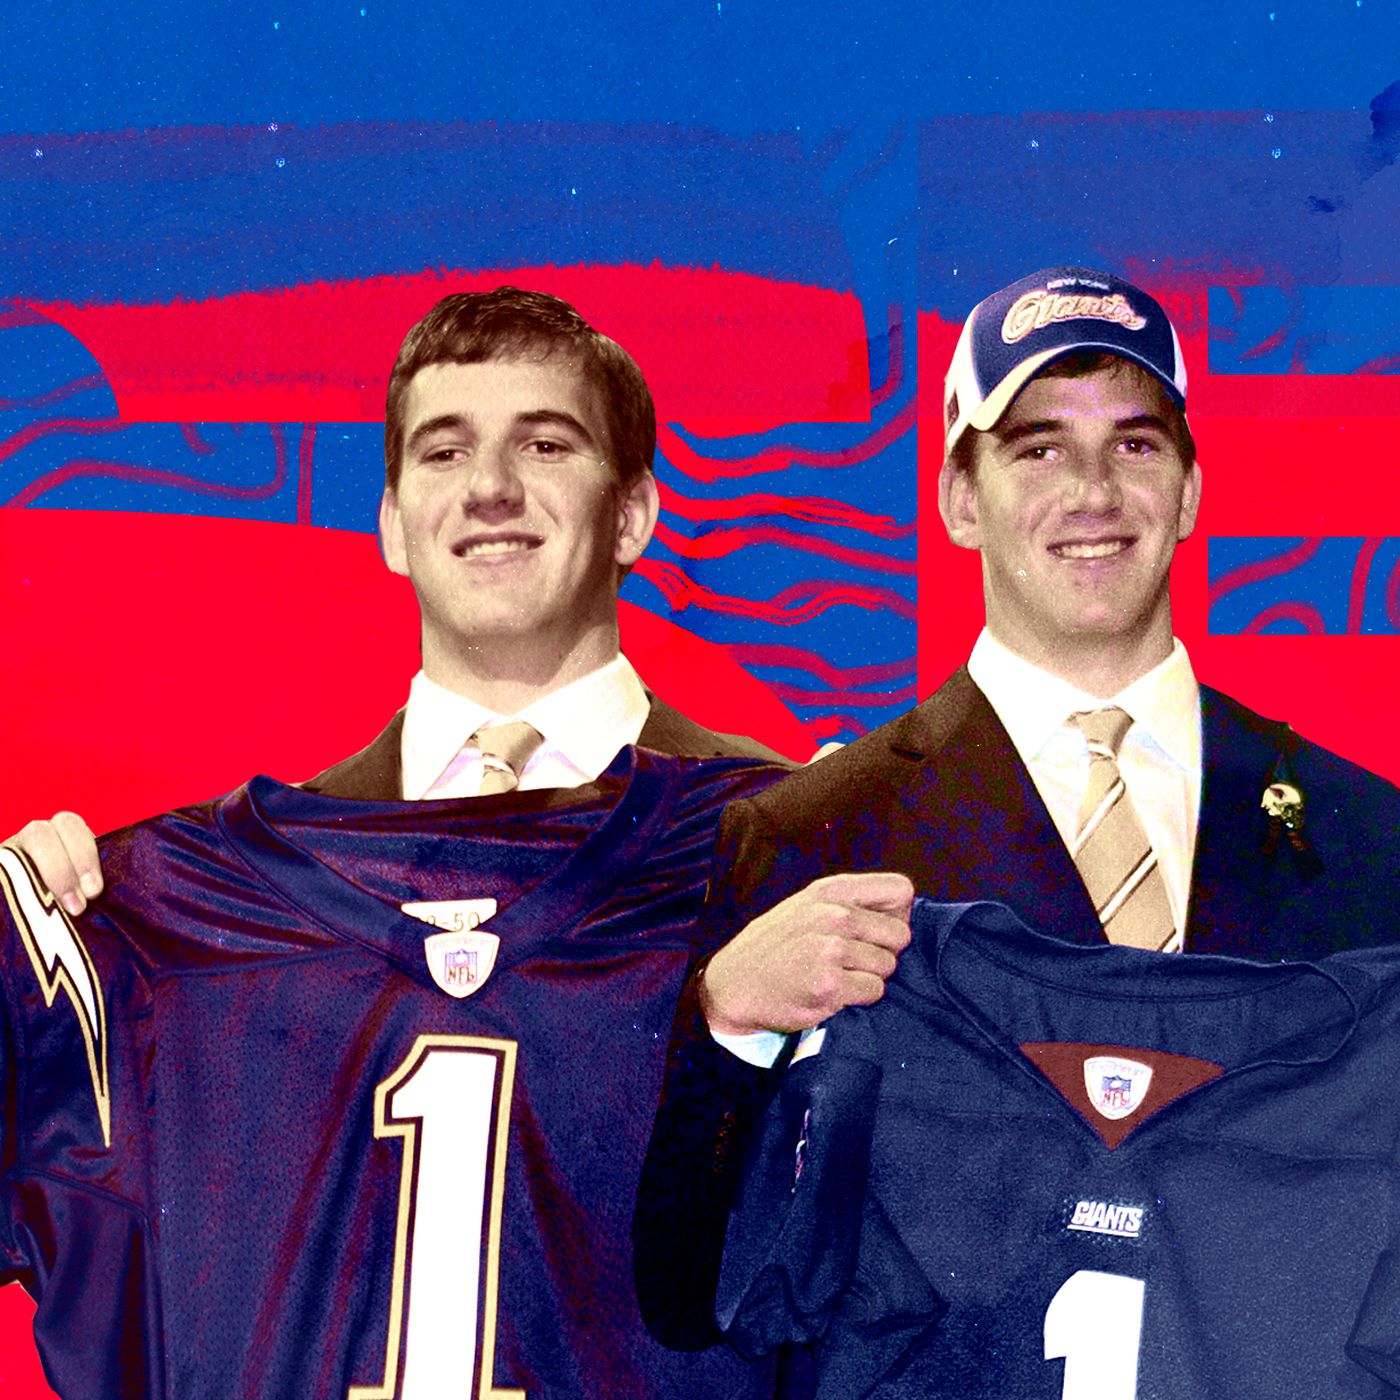 How a 'shadow' helped set up the Eli Manning-Philip Rivers draft